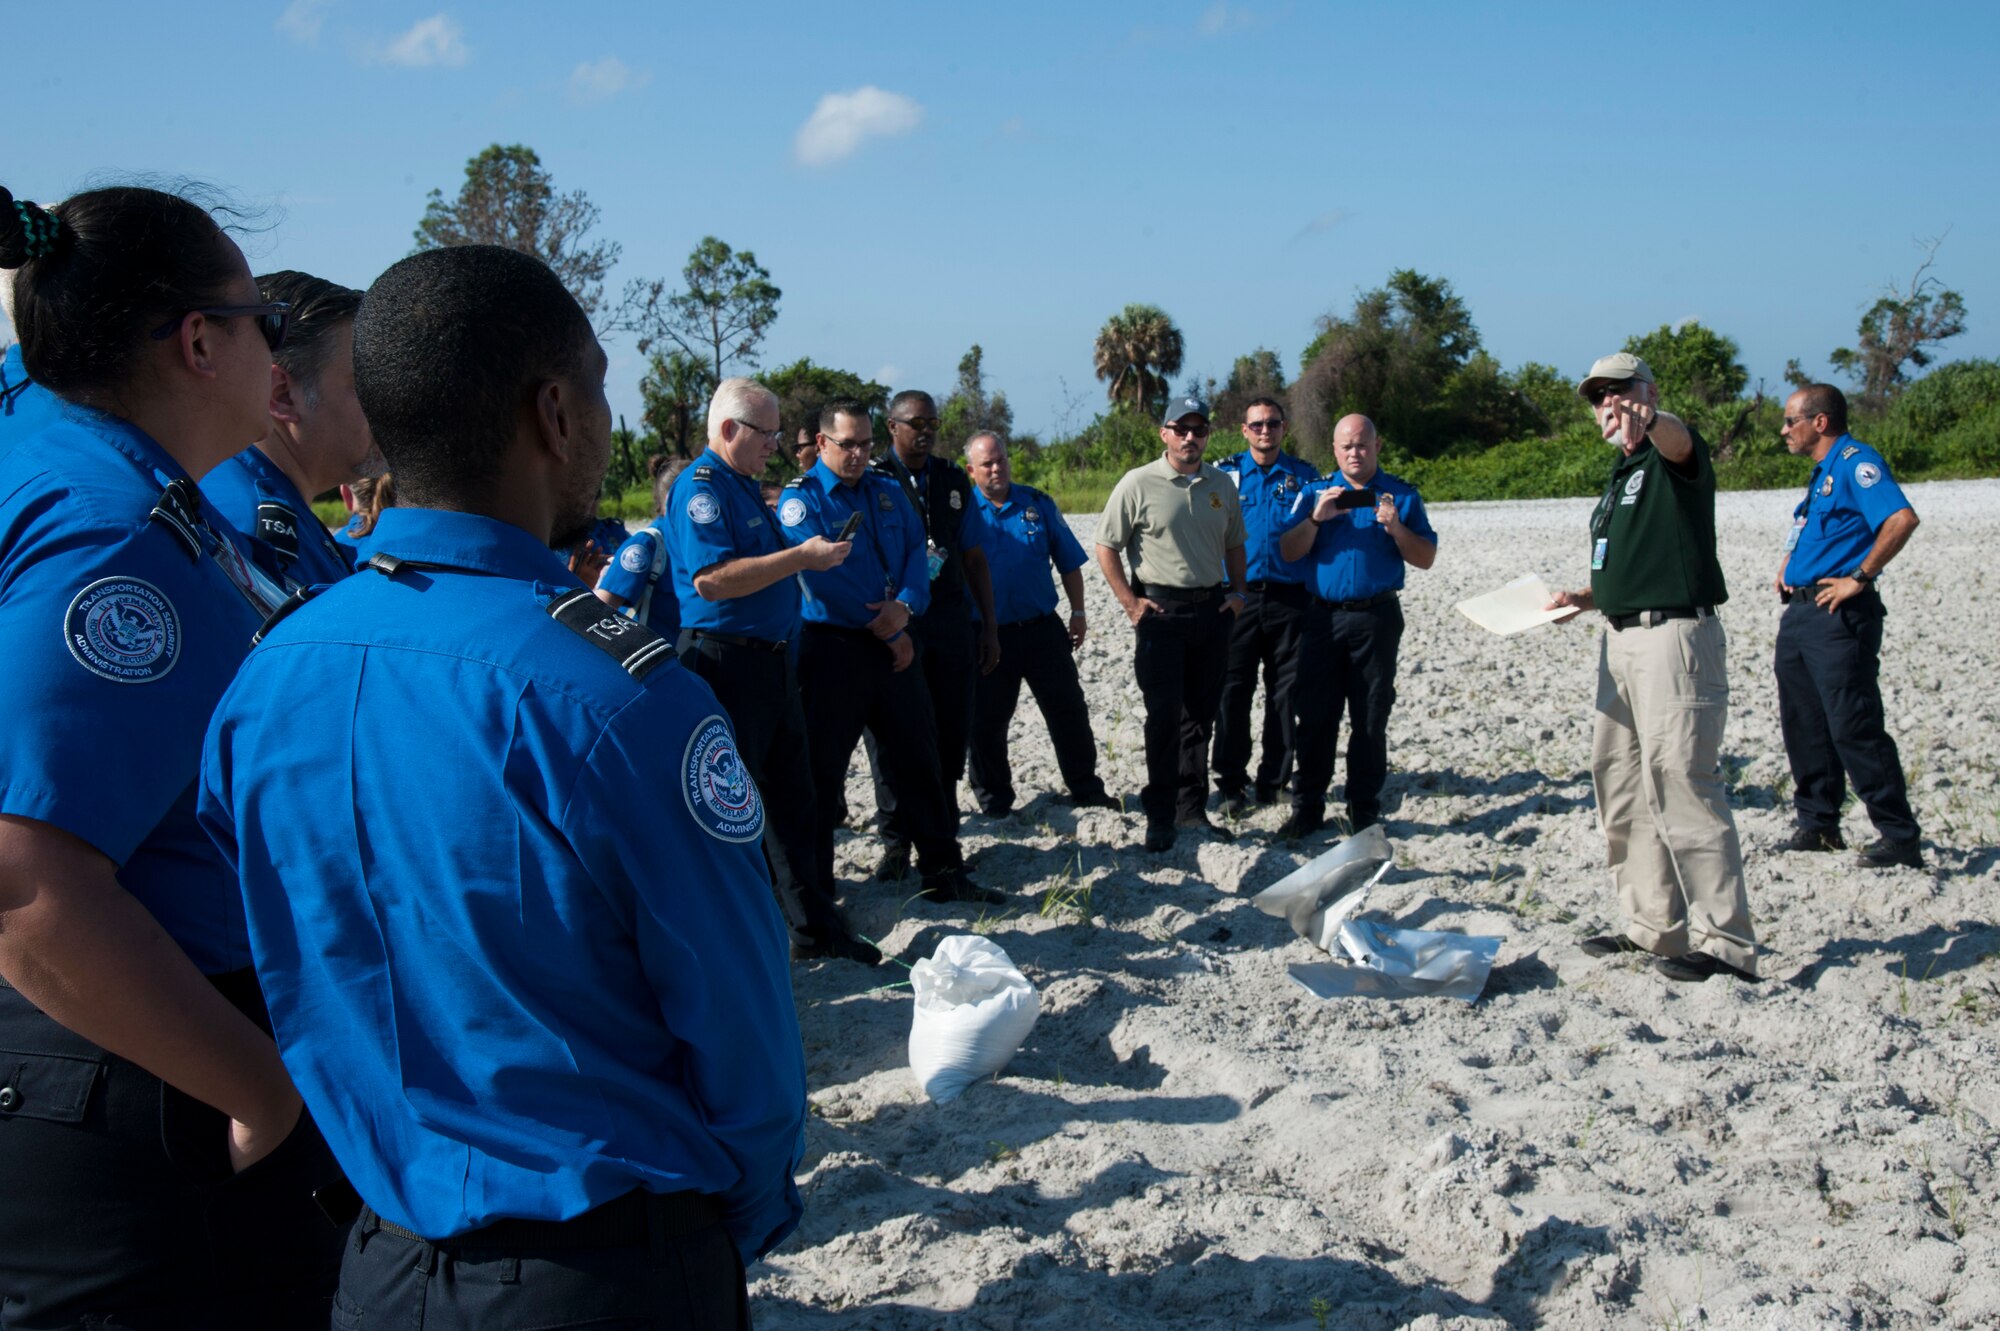 Local Transportation Security Administration officers observe the after effects of explosive ordnance on the bomb range, Sept. 11, 2019, at MacDill Air Force Base, Fla.  The 6th Civil Engineer Explosive Ordnance Disposal Flight hosted an annual training for the TSA officers, to demonstrate the effects of explosive devices. (U.S. Air Force photo by Airman 1st Class Shannon Bowman)